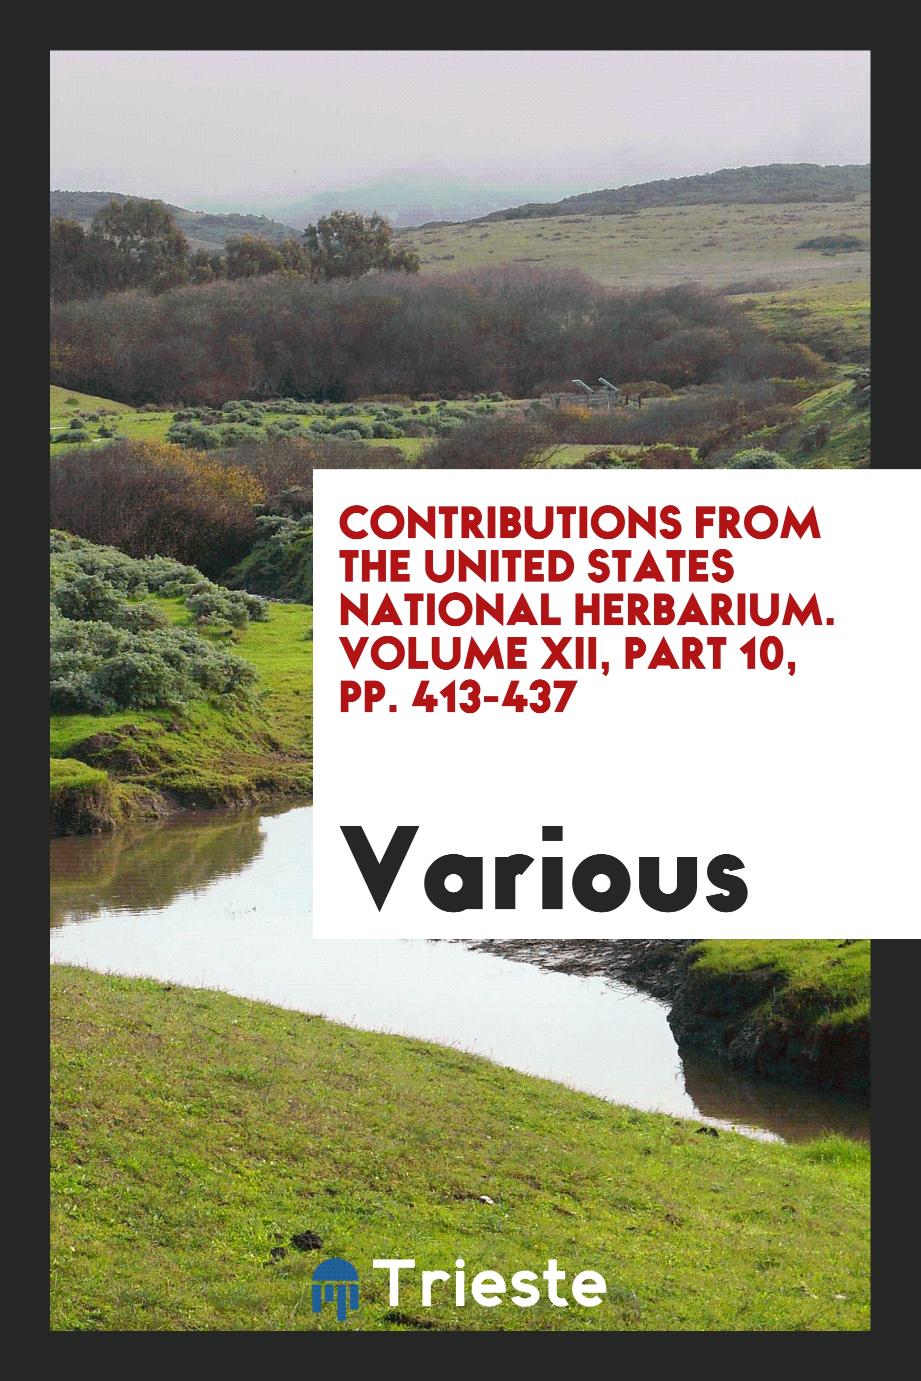 Contributions from the United States National Herbarium. Volume XII, Part 10, pp. 413-437